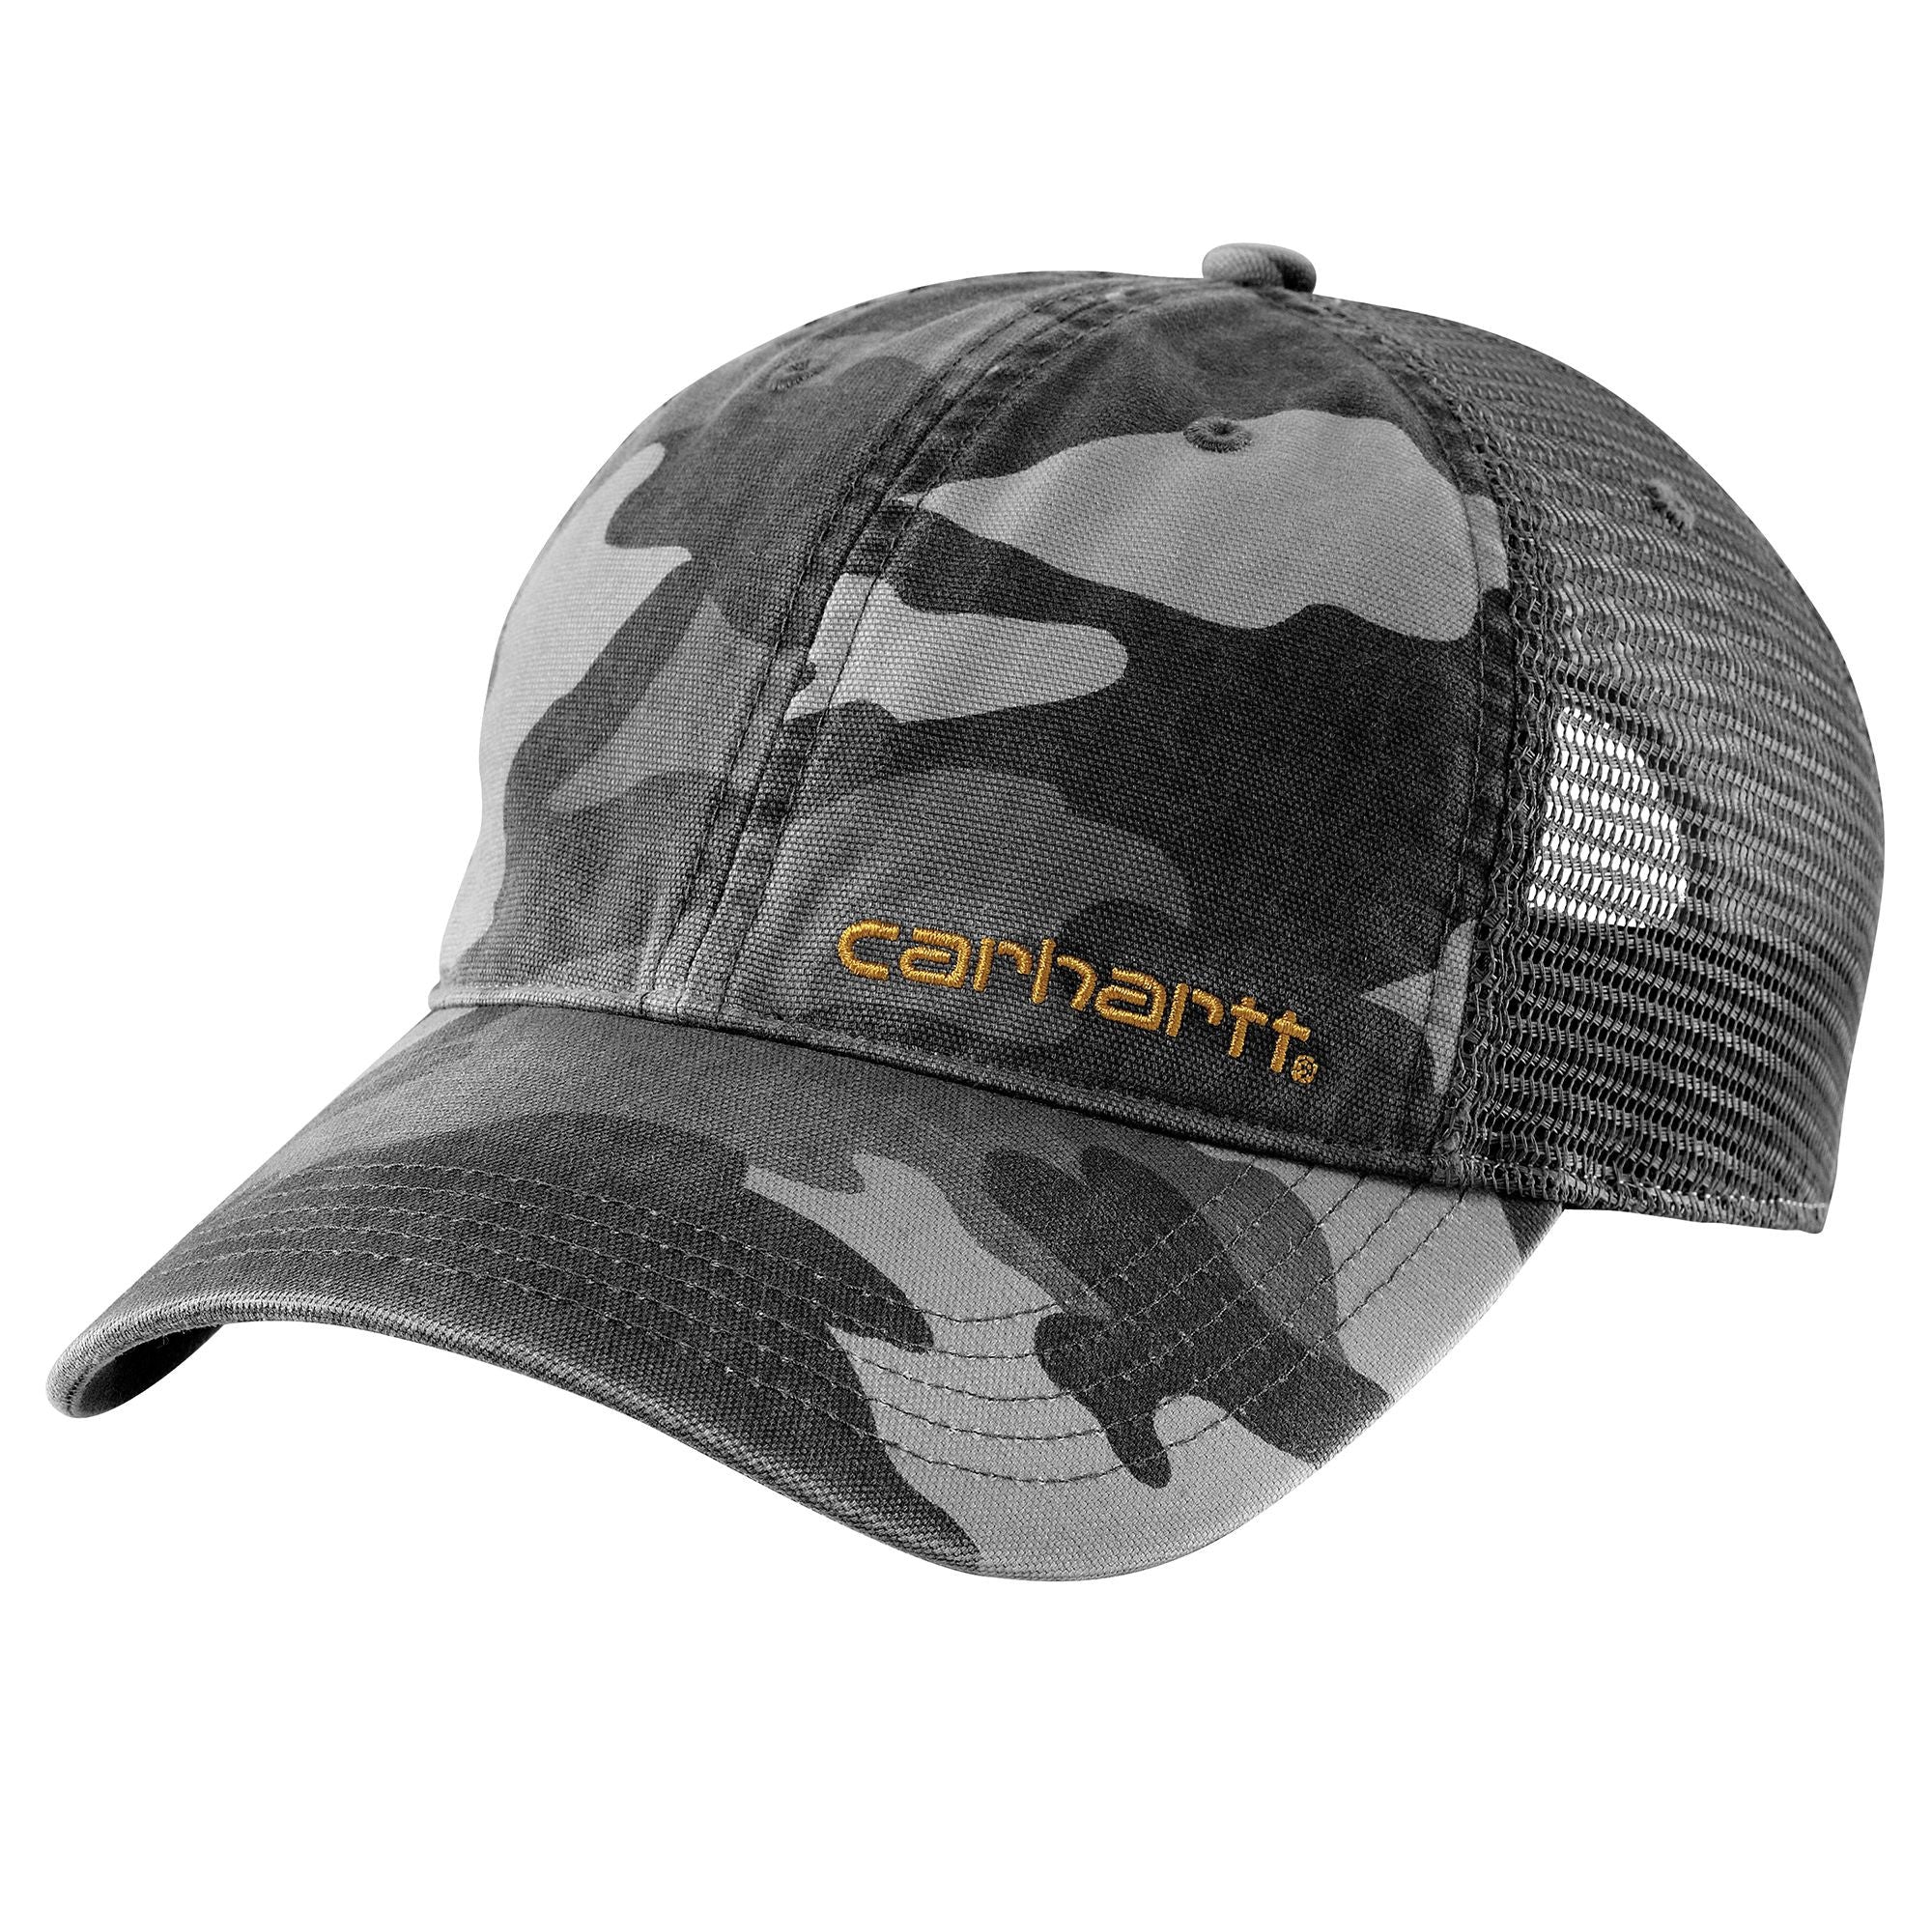 A101194 Carhartt Brandt Cap | Pioneer Outfitters